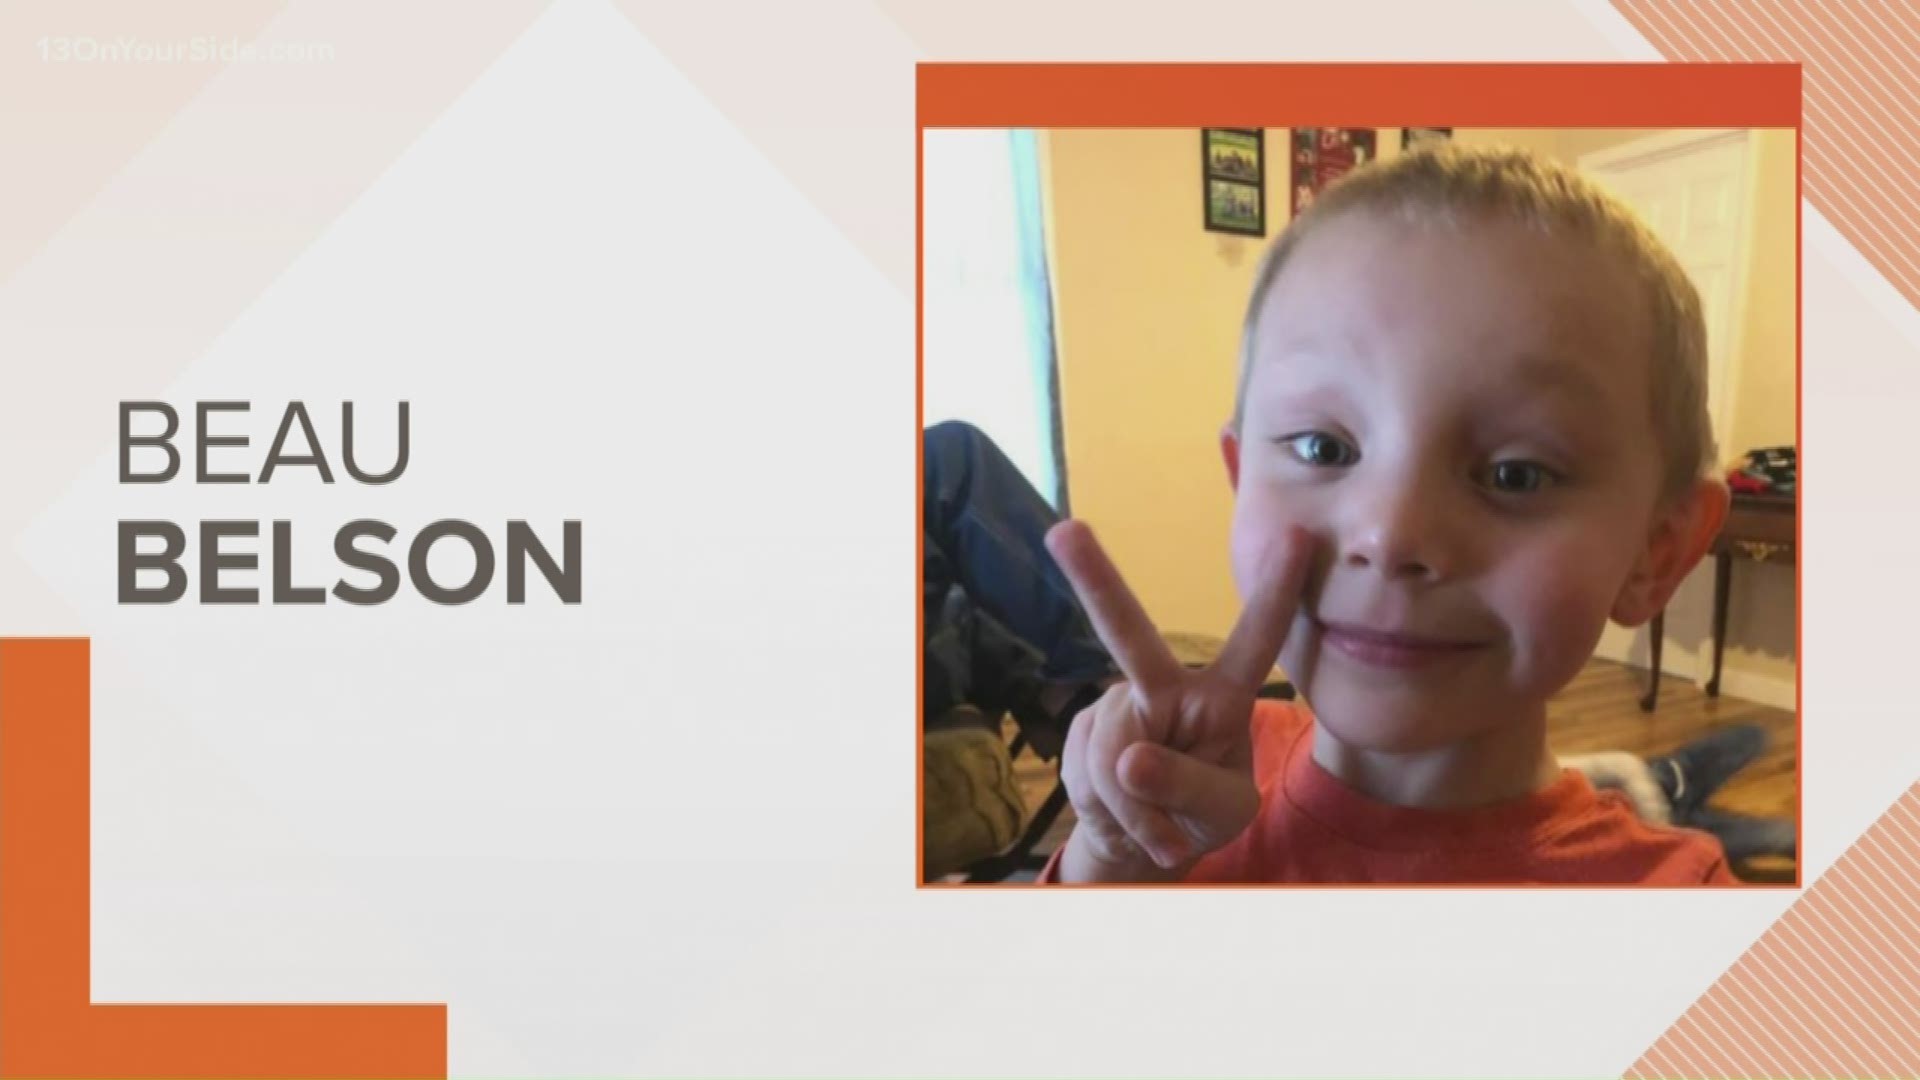 Authorities confirm with 13 ON YOUR SIDE that 5-year-old Beau Belson's body was located Thursday in a body of water near where he went missing Wednesday.